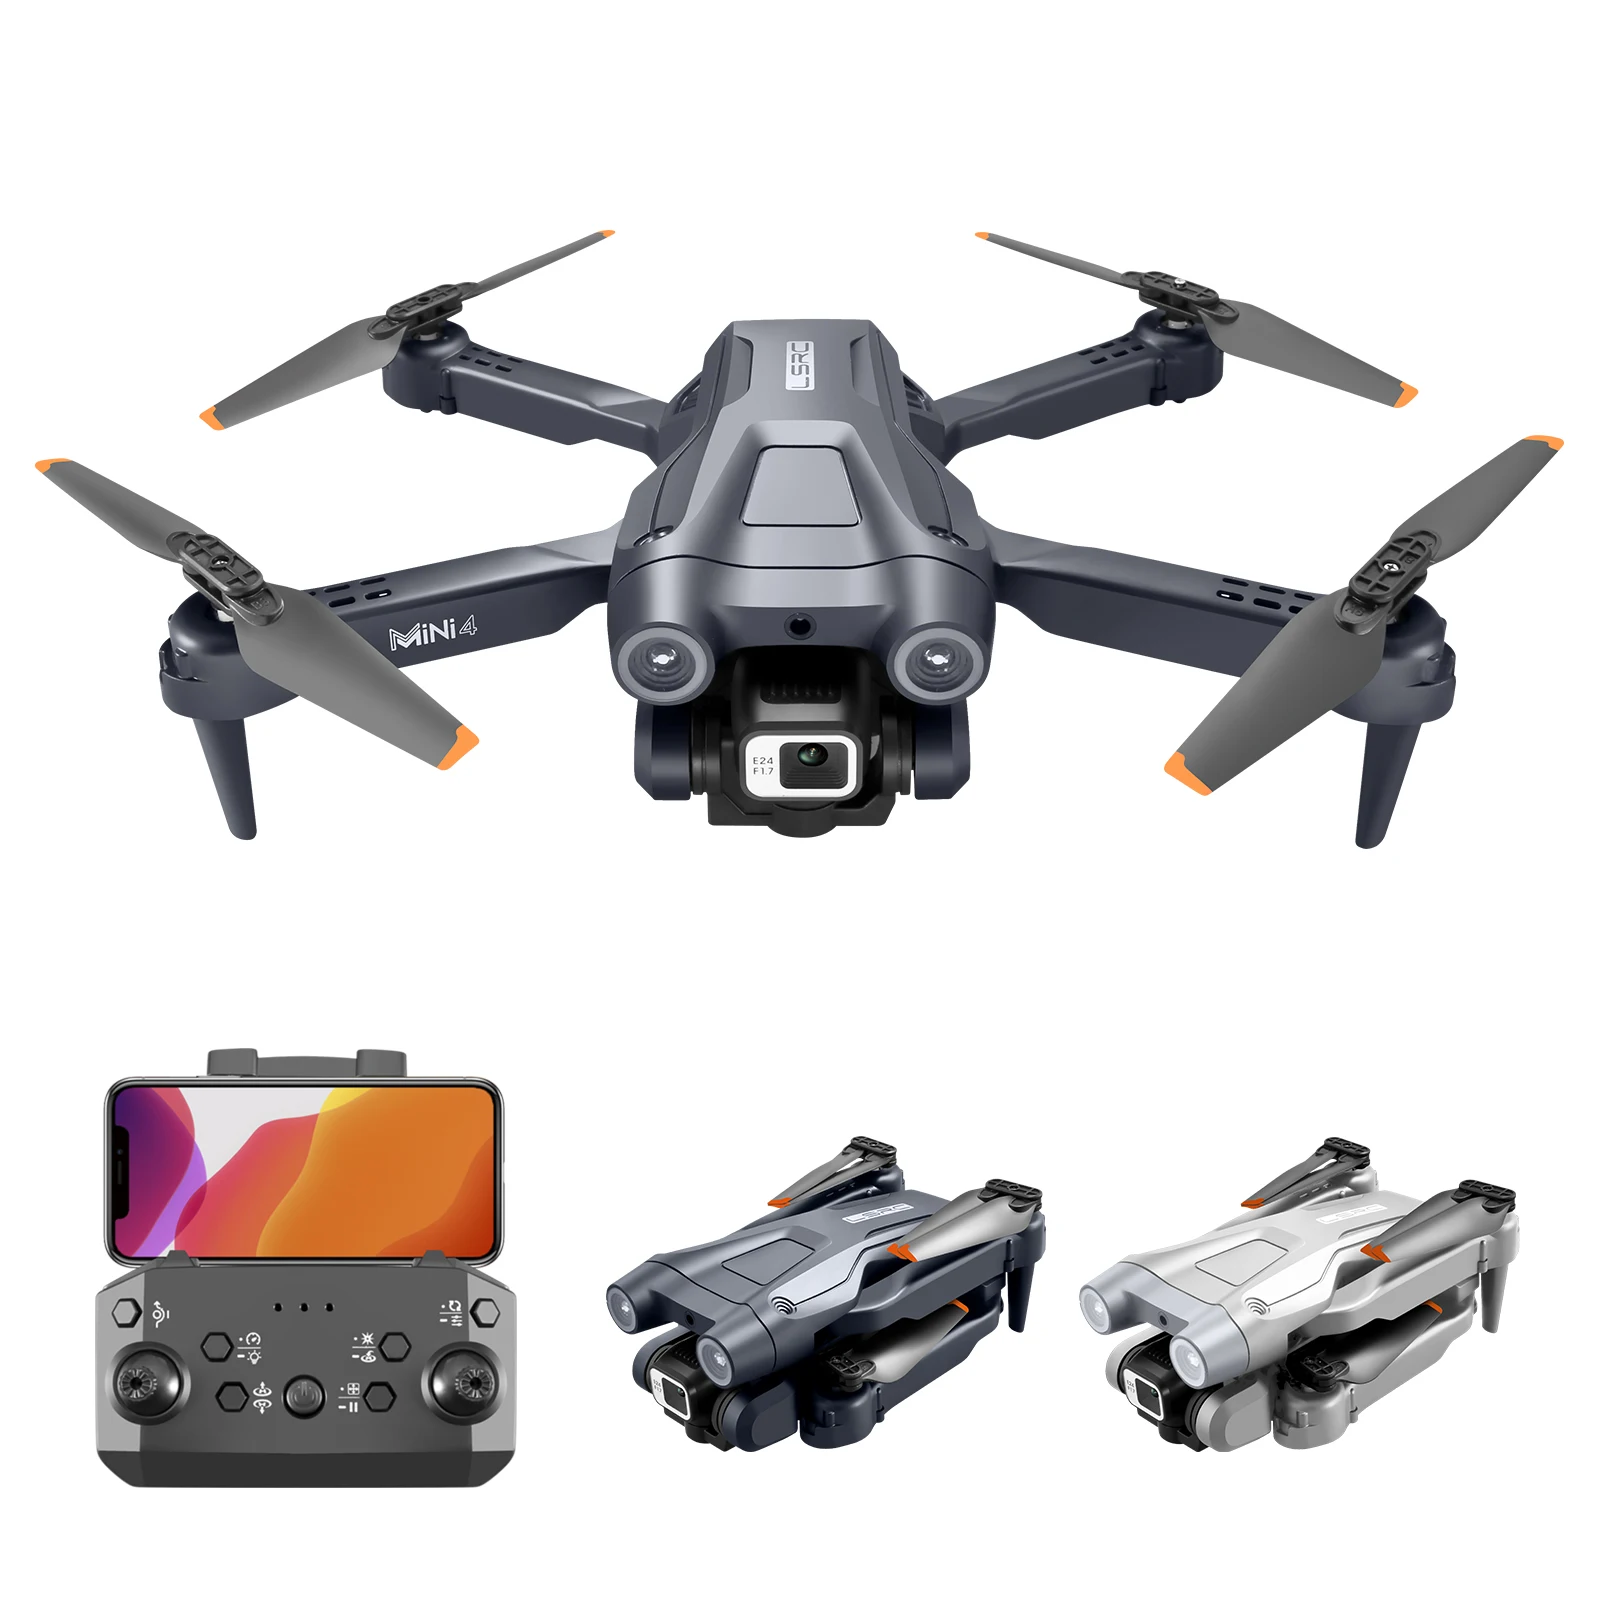 MINI 4 Drone Aerial UAV 4K Invert Aerial Vehicle Optical Flow Location Obstacle Avoidance Remote Control Aircraft Toy enlarge